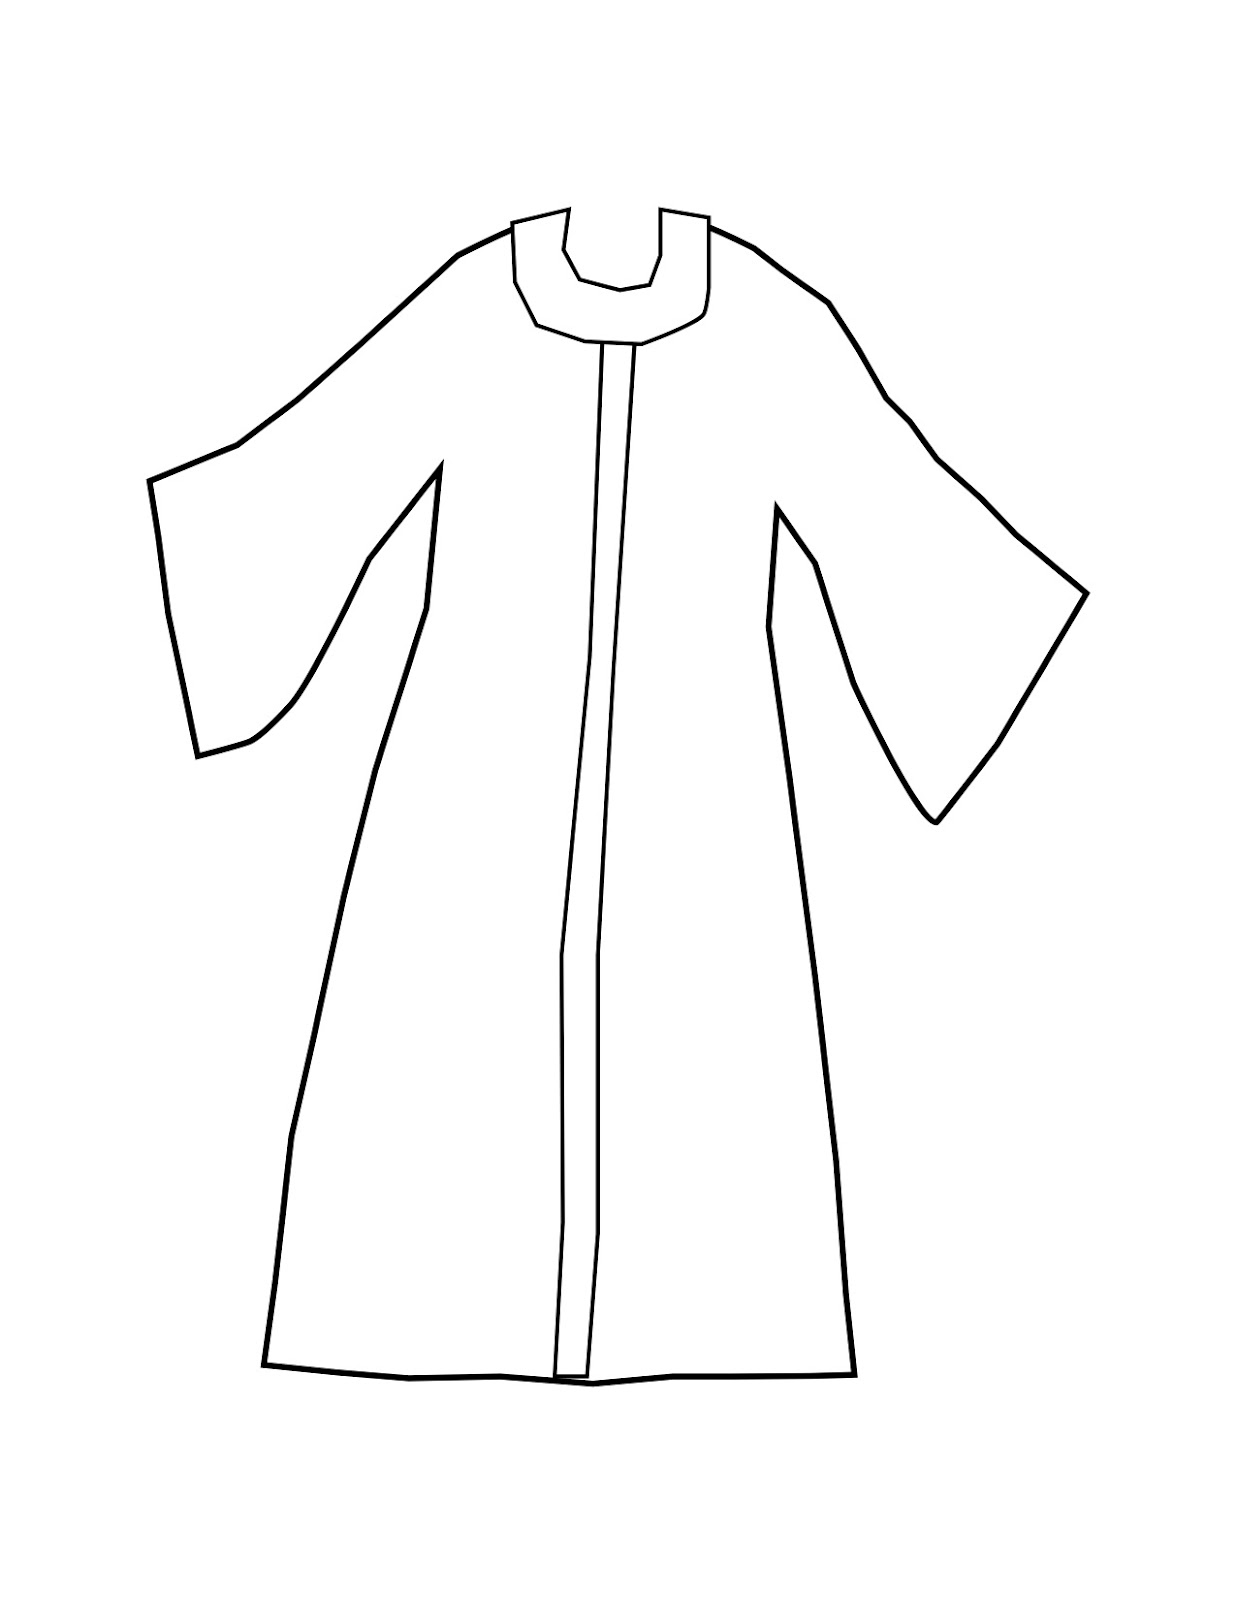 Coloring Page Of A Coat Free Cliparts That You Can Download To You